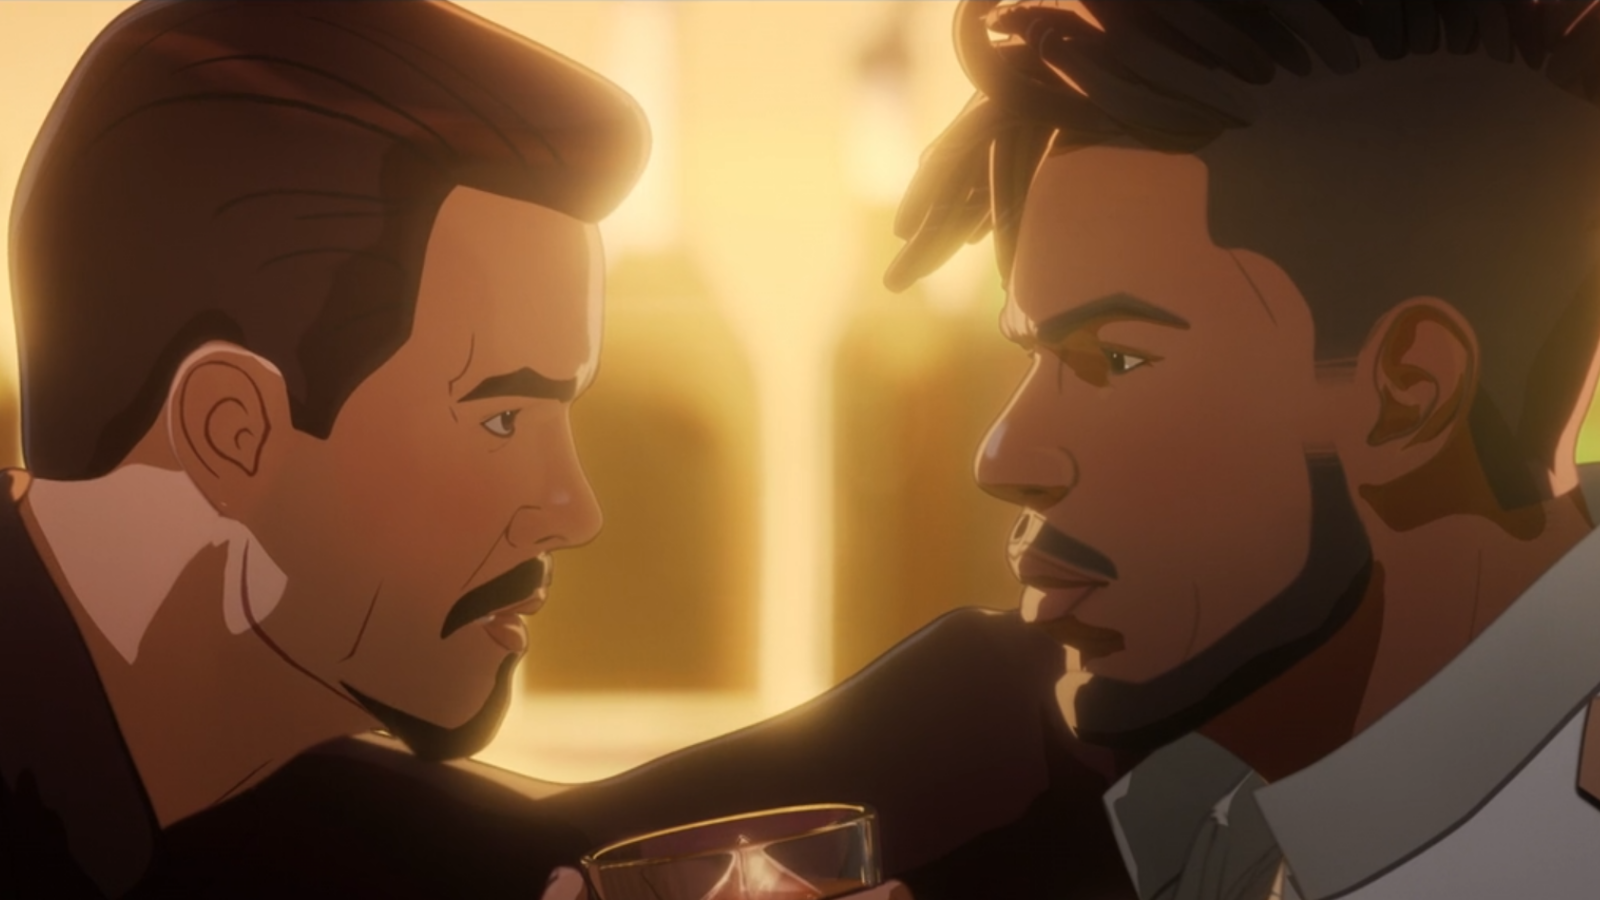 Tony and Killmonger staring into each other's eyes